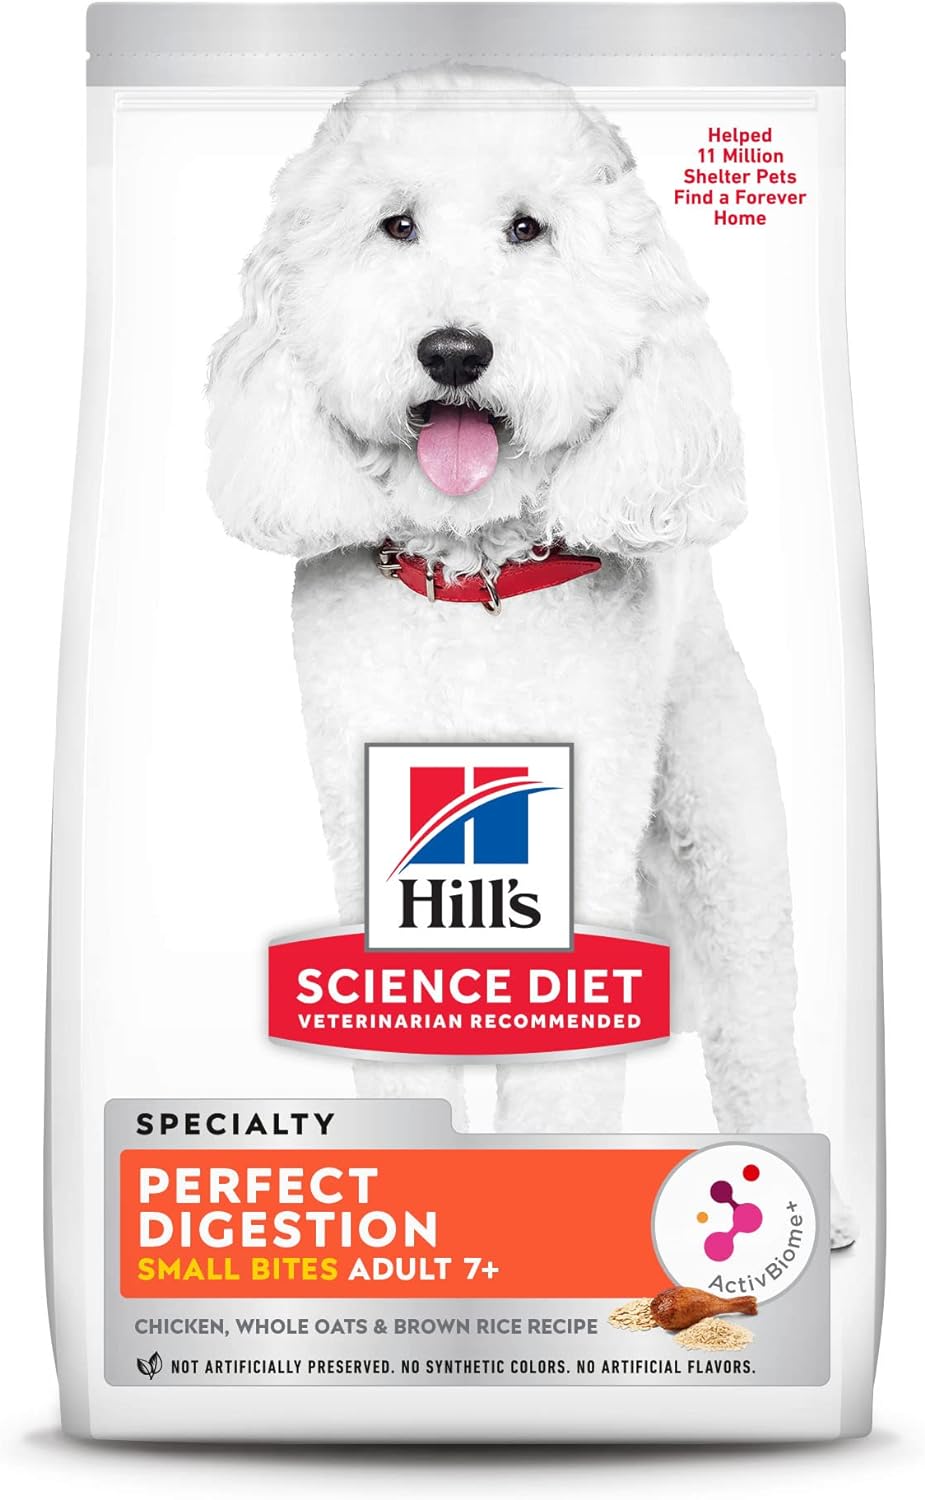 Hill’s Science Diet Adult 7+ Perfect Digestion Small Bites Chicken, Whole Oats & Brown Rice Recipe Dry Dog Food – Gallery Image 1